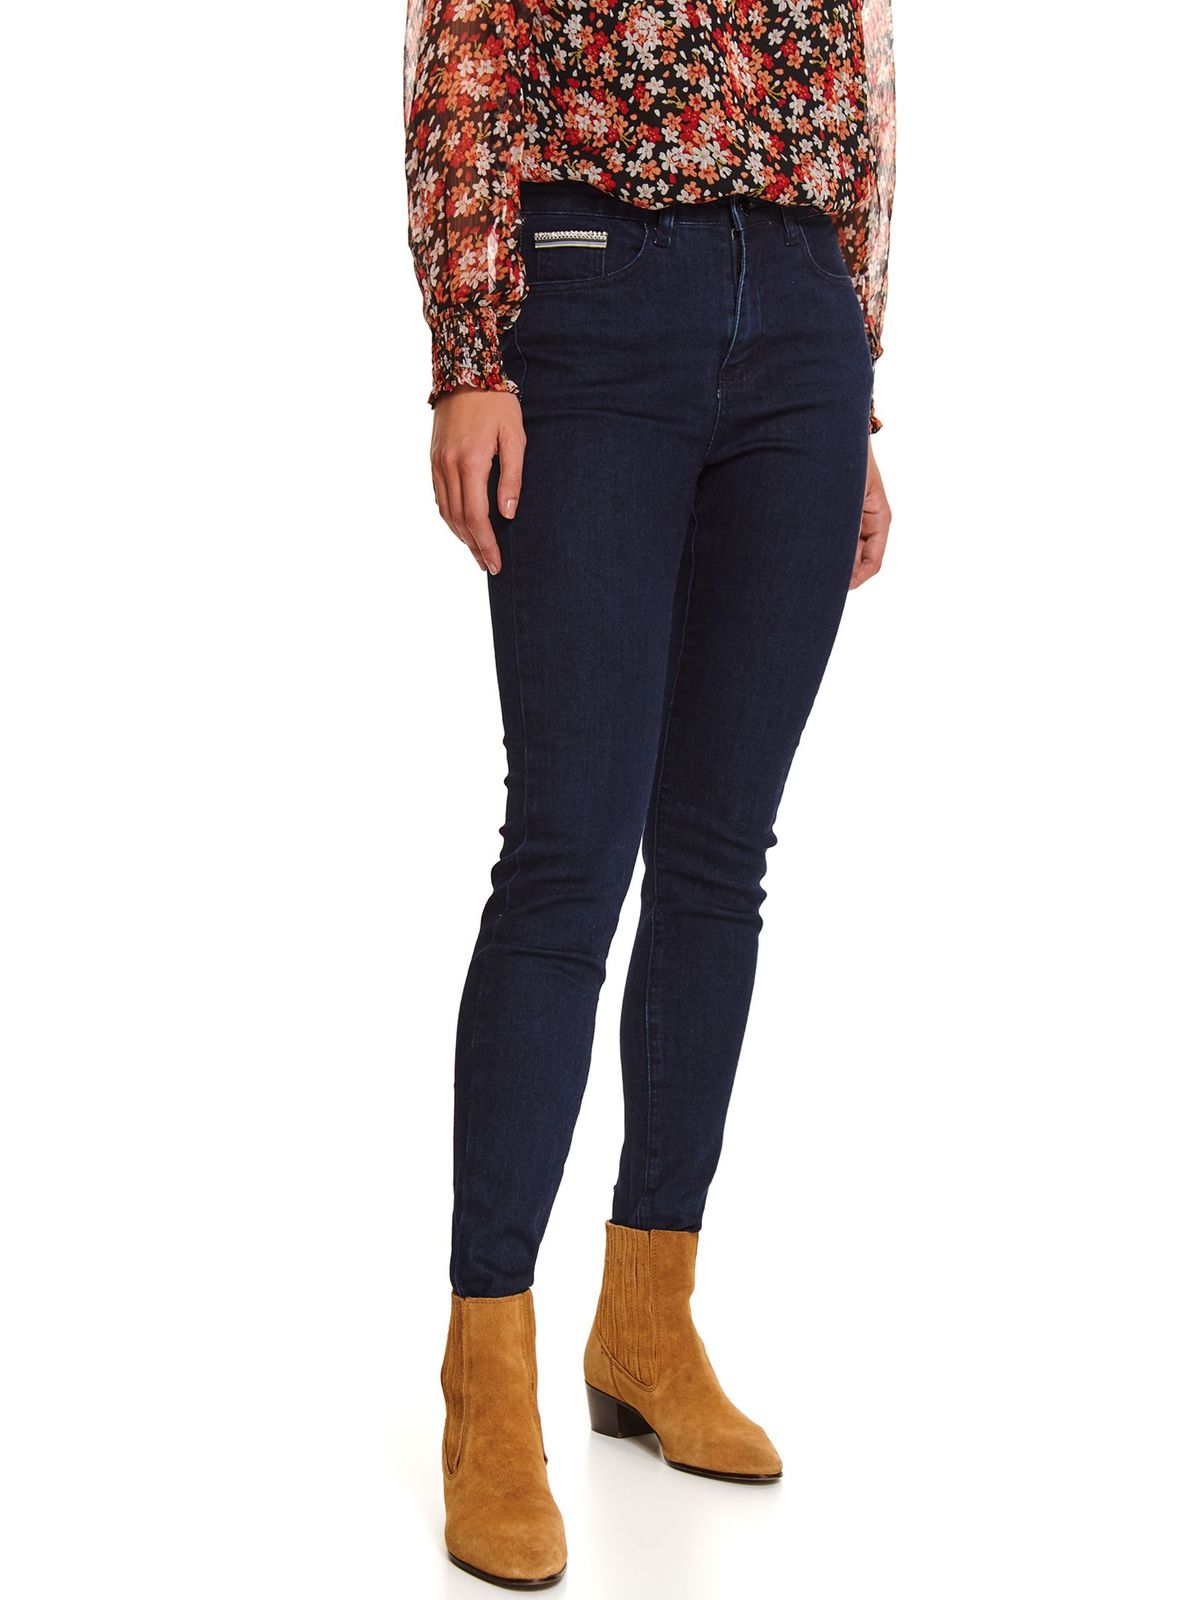 Blue trousers casual skinny jeans denim with medium waist